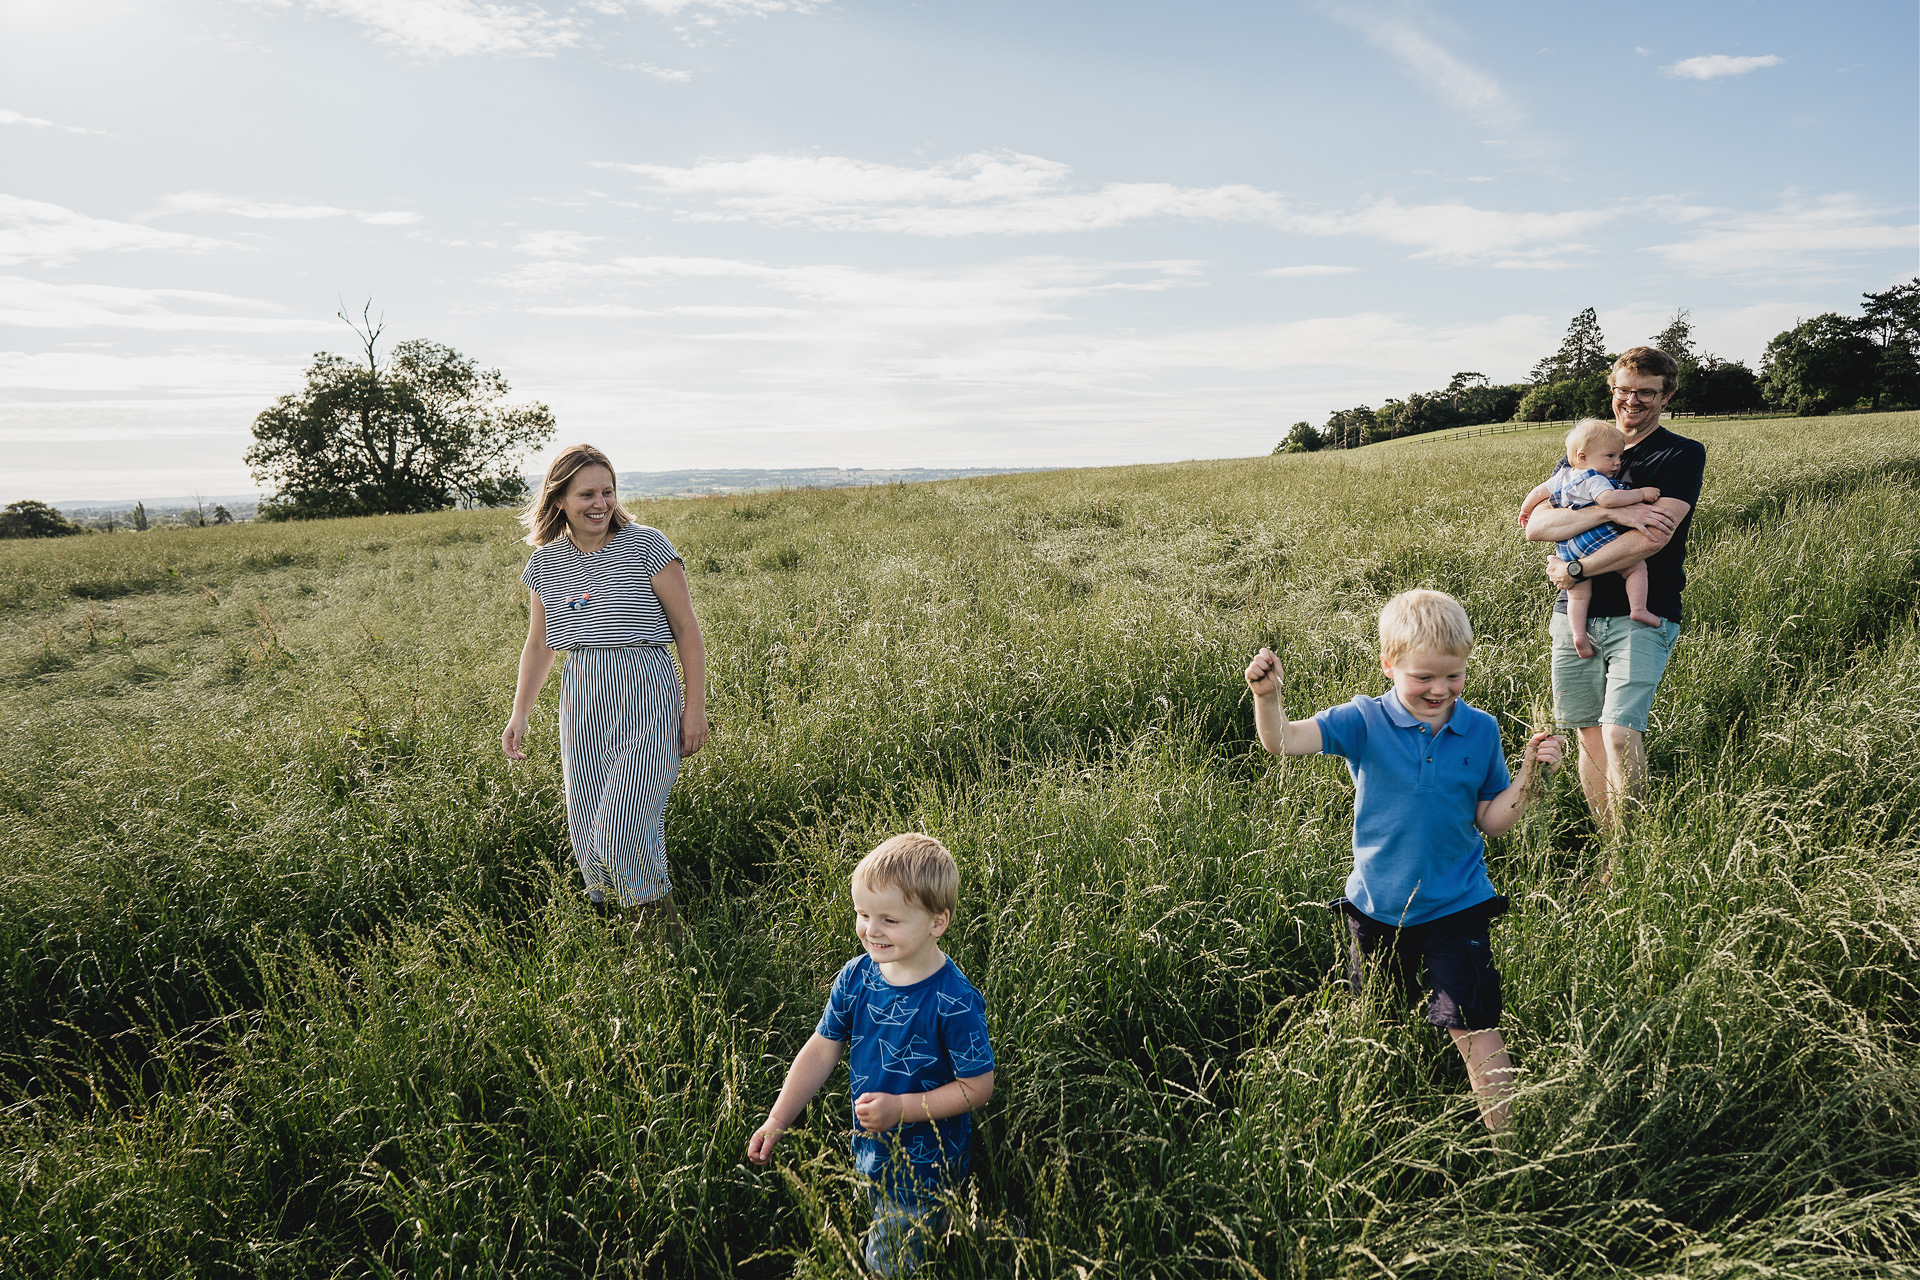 Somerset family photography - a relaxed image of a family walking through a field together